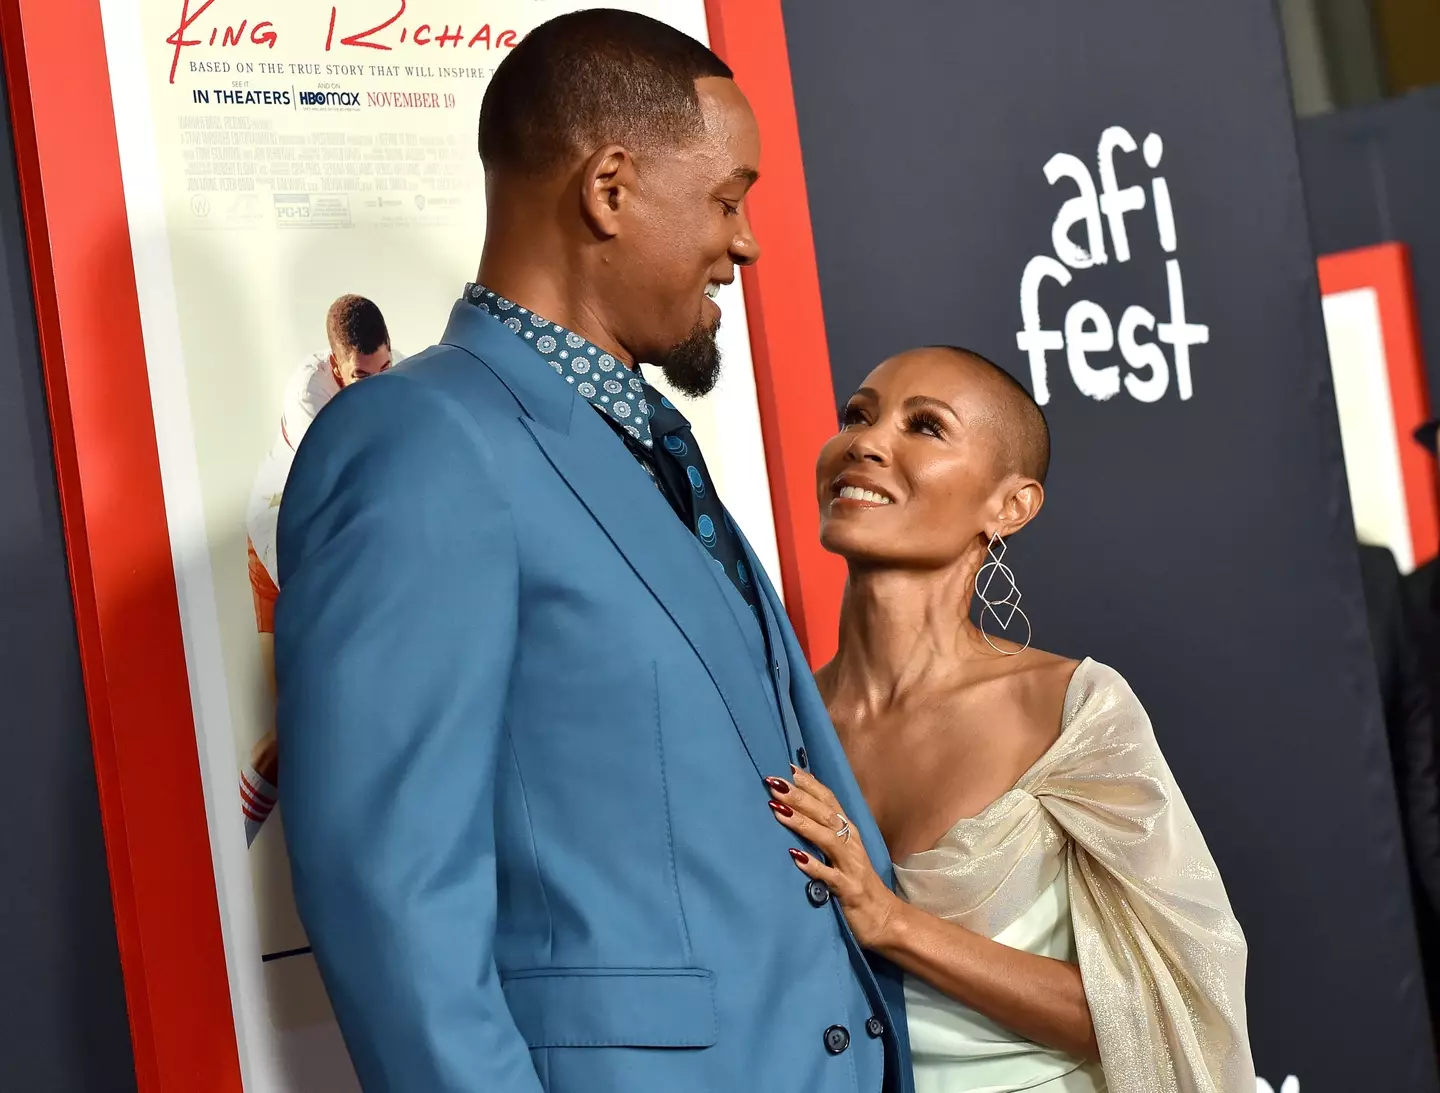 Jada and Will continued to appear in public as a couple, even after their separation.